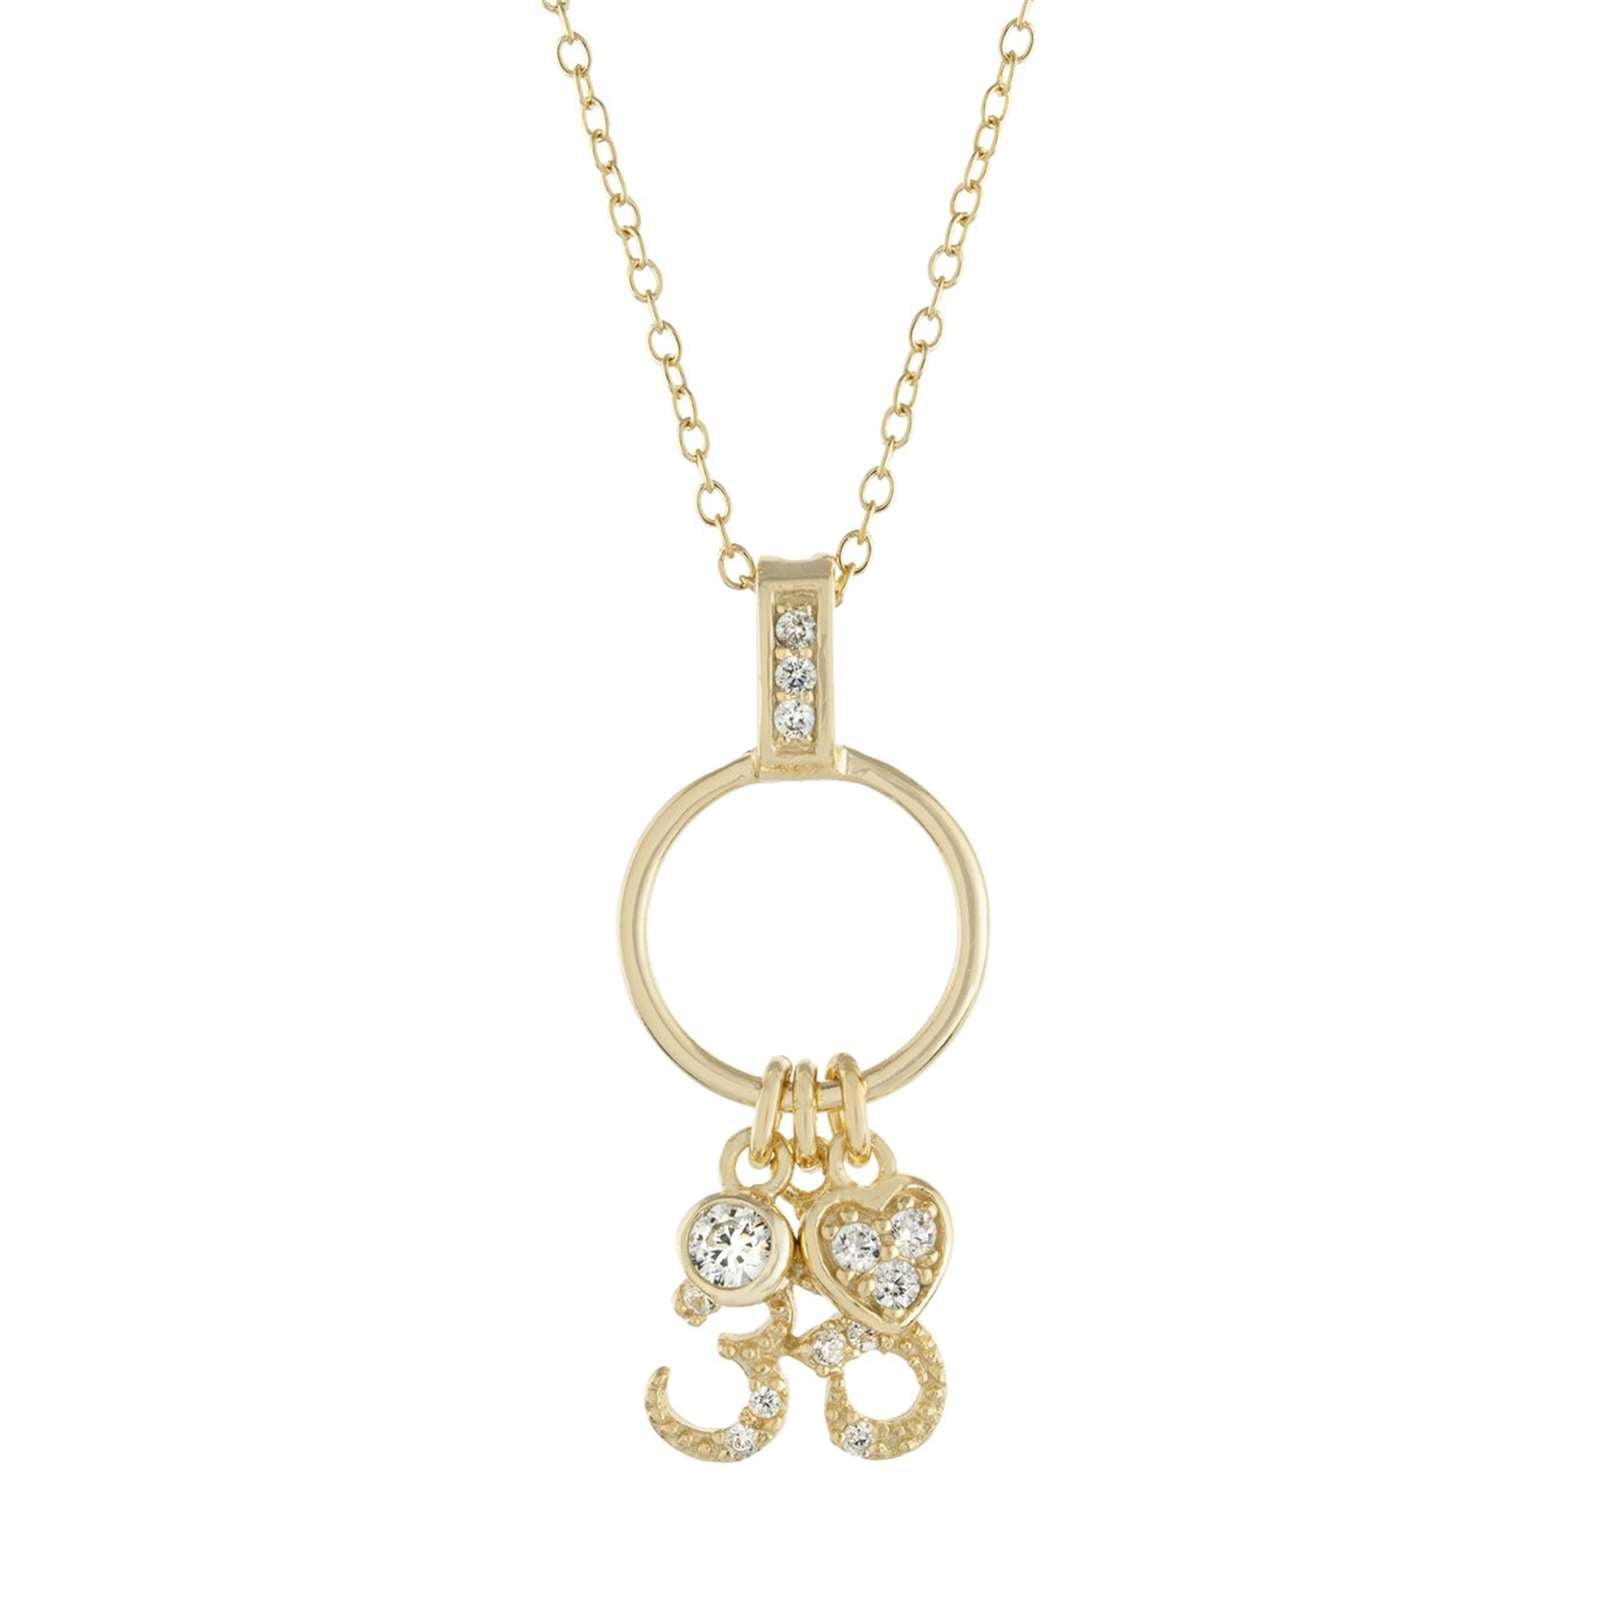 Athra Women Om Charm Circle Necklace With Extension